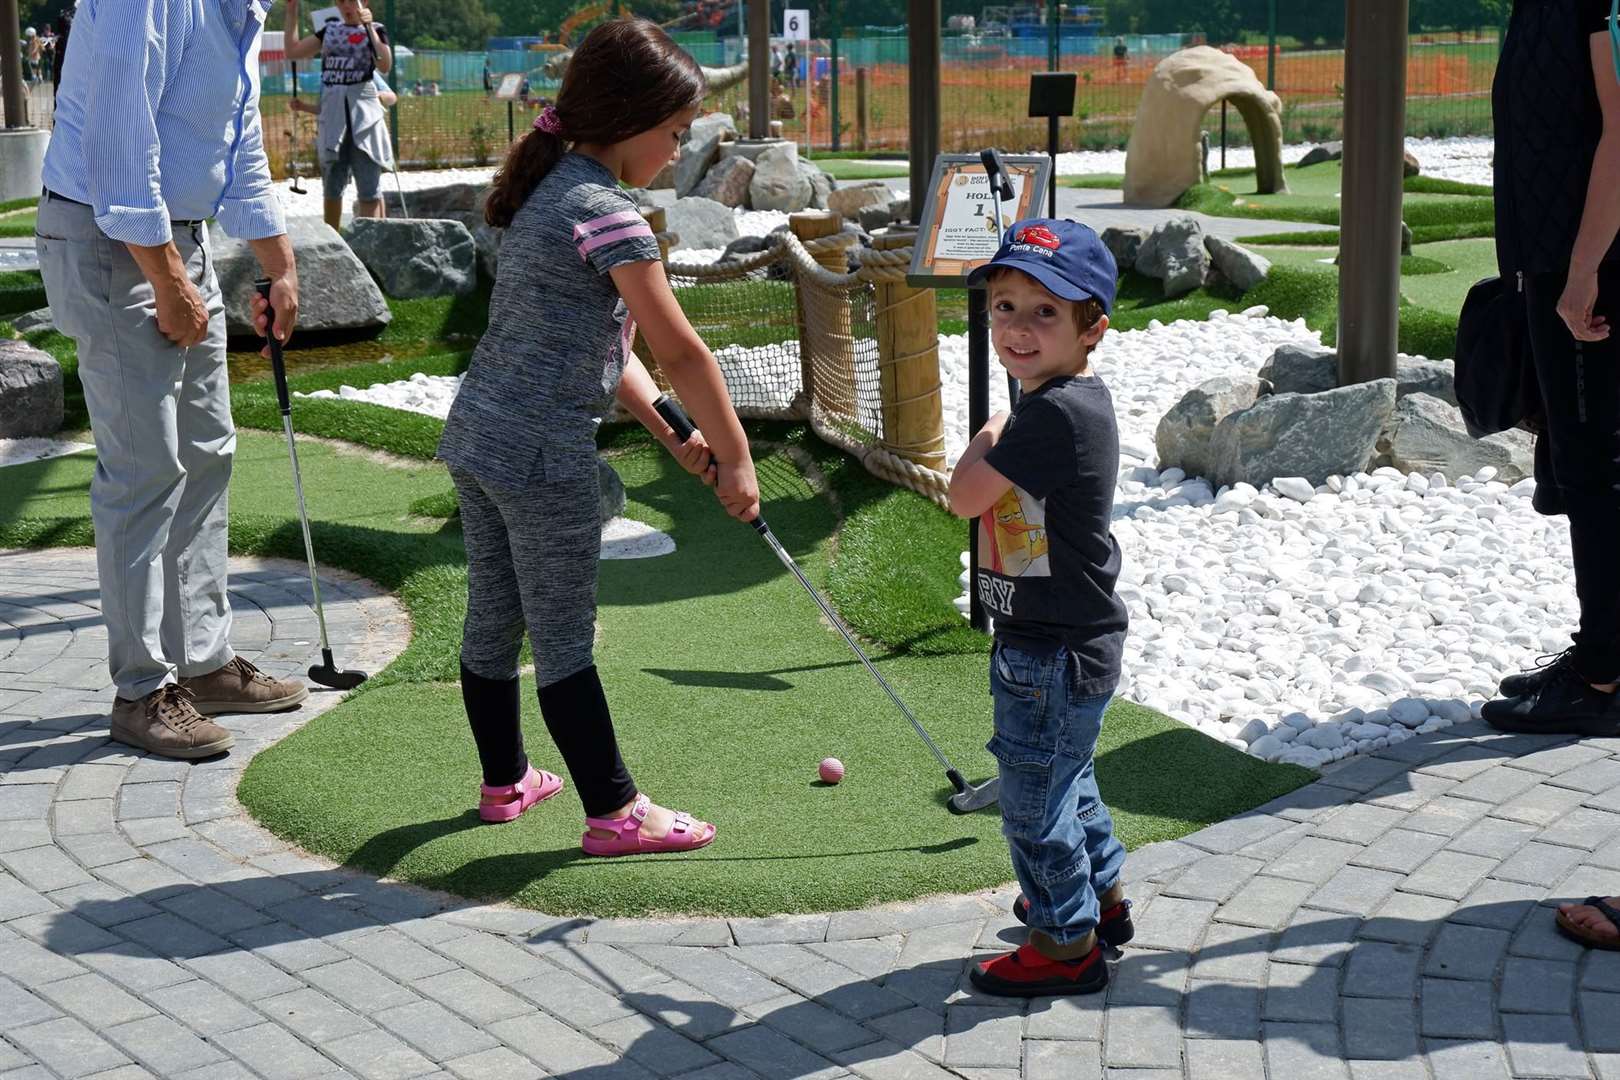 Dino Golf is suitable for children of all ages